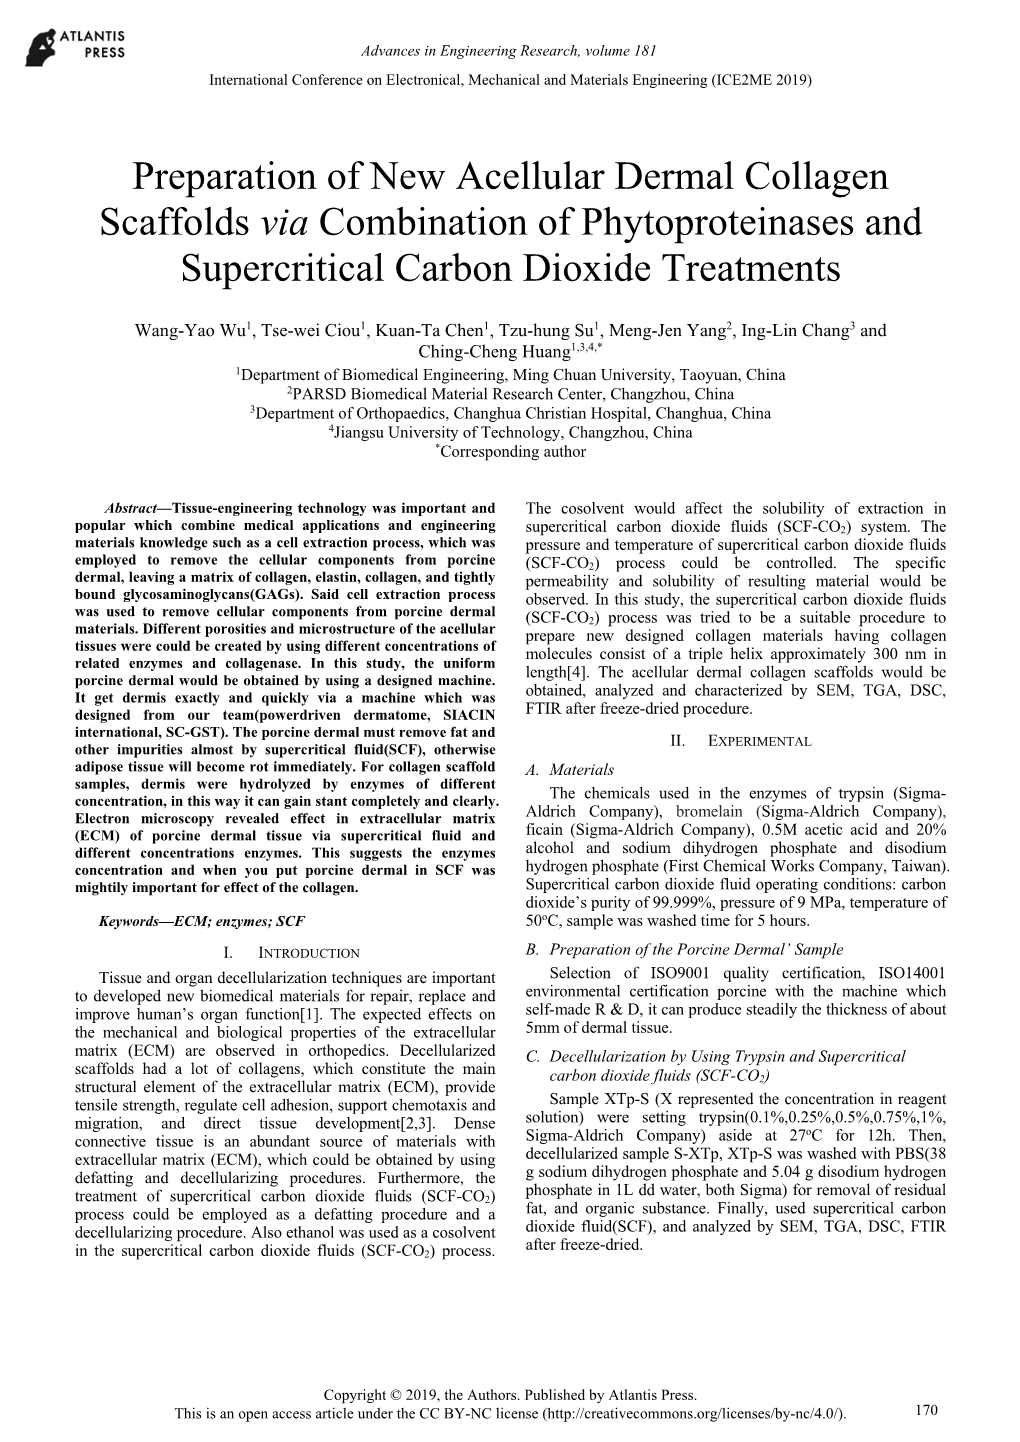 Preparation of New Acellular Dermal Collagen Scaffolds Via Combination of Phytoproteinases and Supercritical Carbon Dioxide Treatments